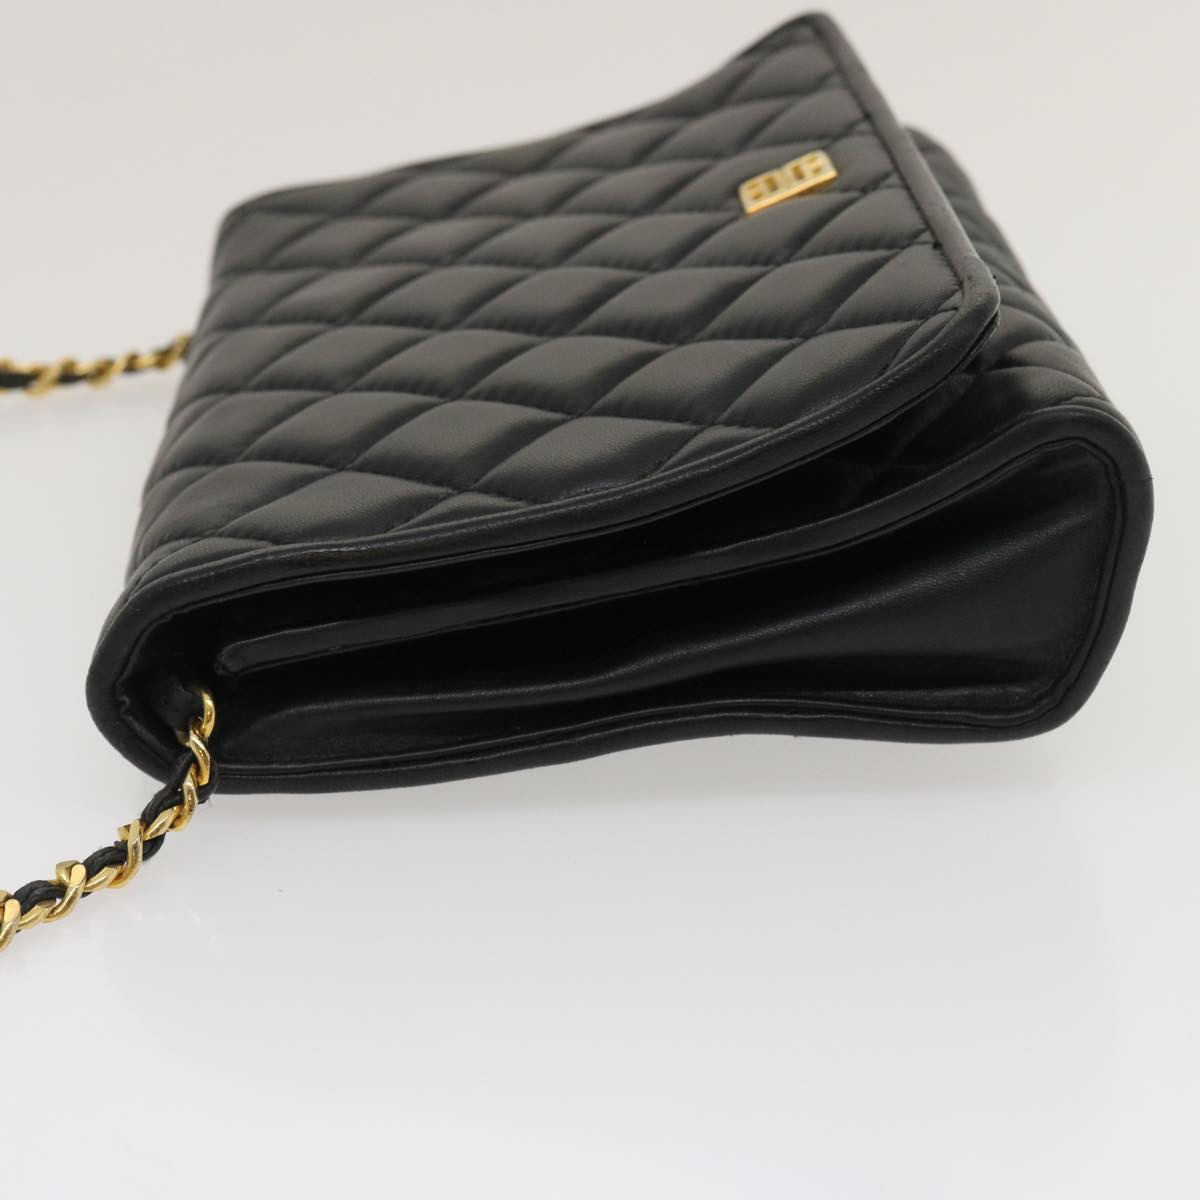 GIVENCHY Chain Shoulder Bag Leather Black Auth am2537g